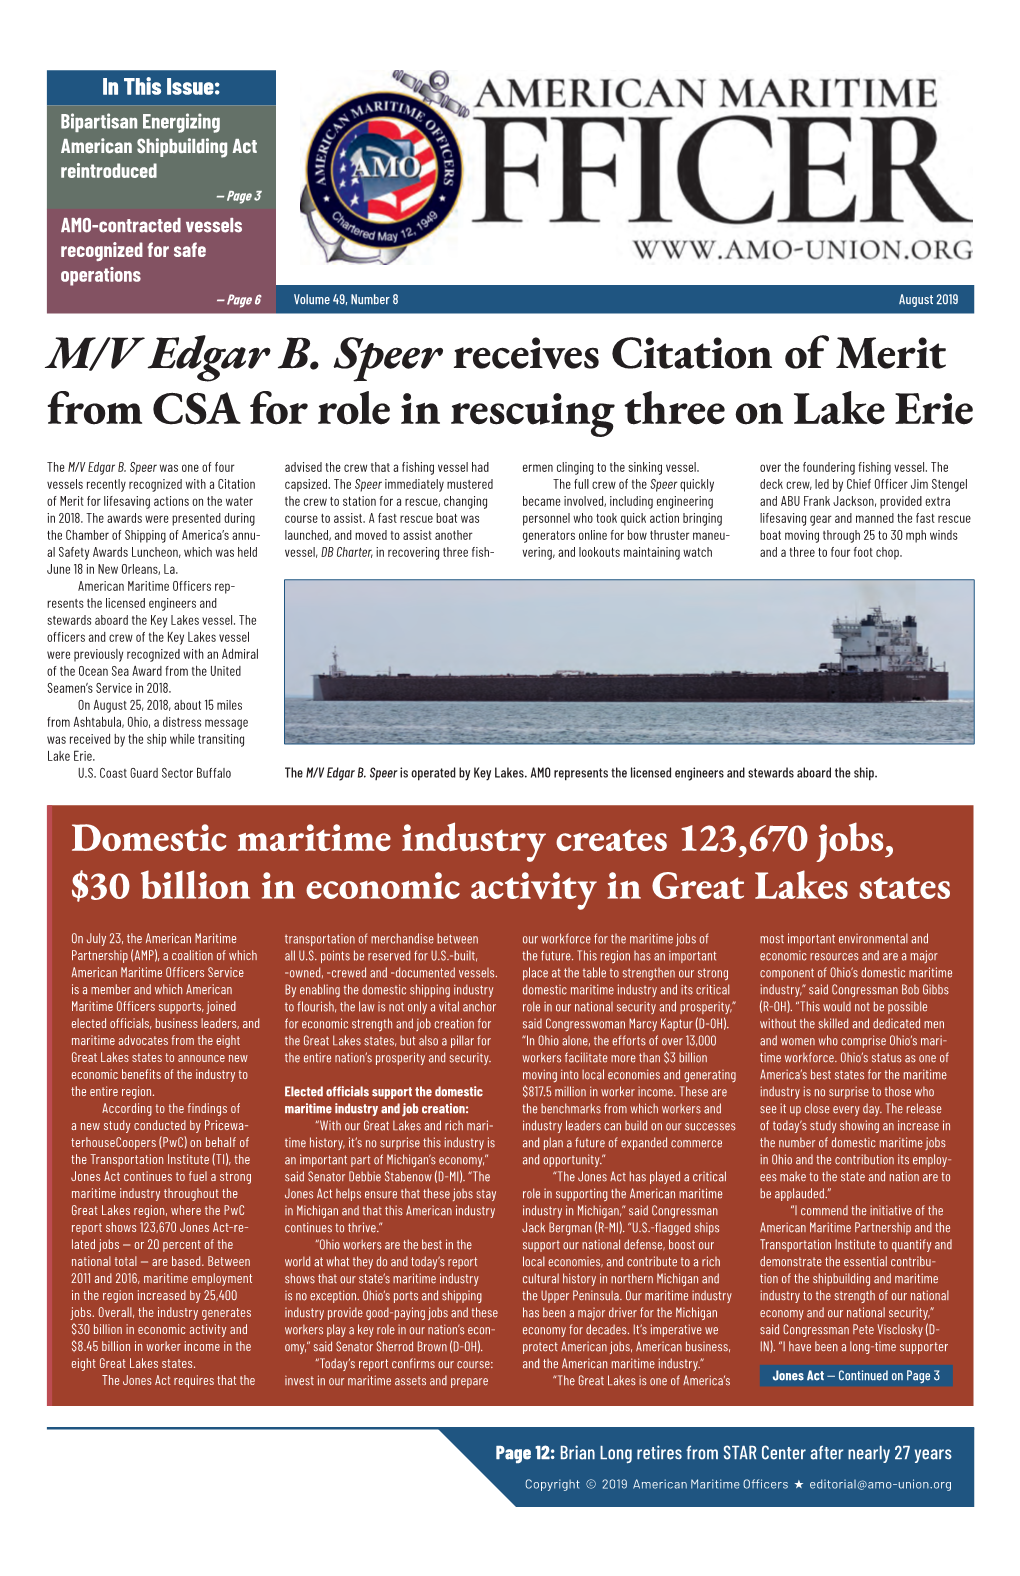 M/V Edgar B. Speer Receives Citation of Merit from CSA for Role in Rescuing Three on Lake Erie